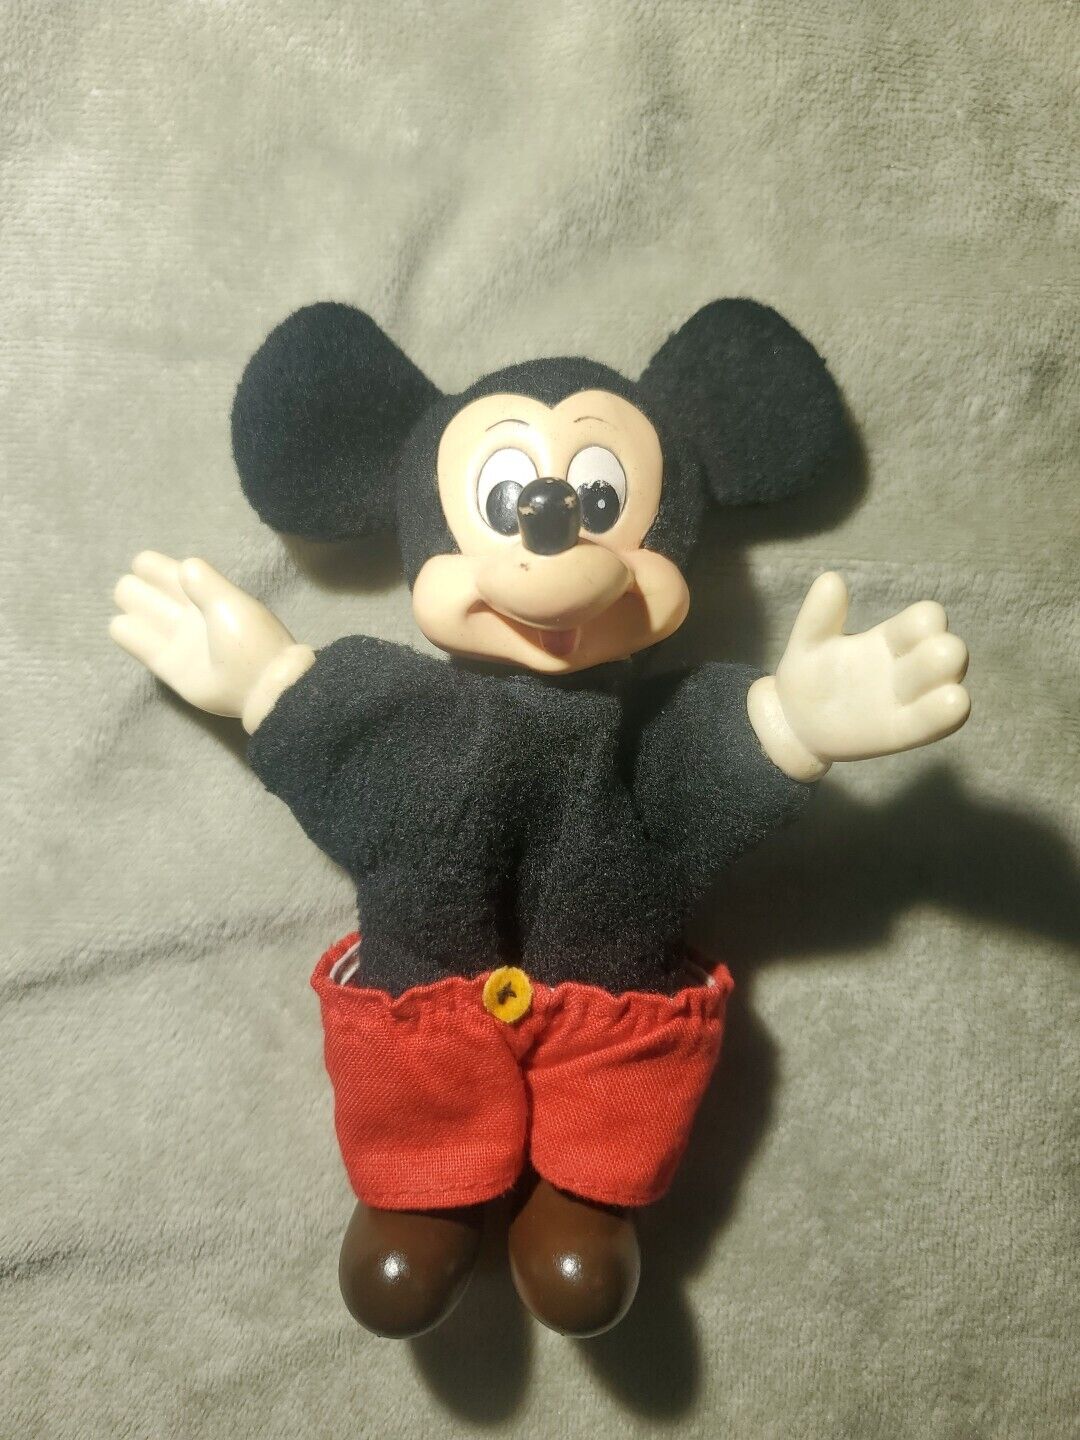 Vintage Disney Mickey Mouse doll hard face and hands